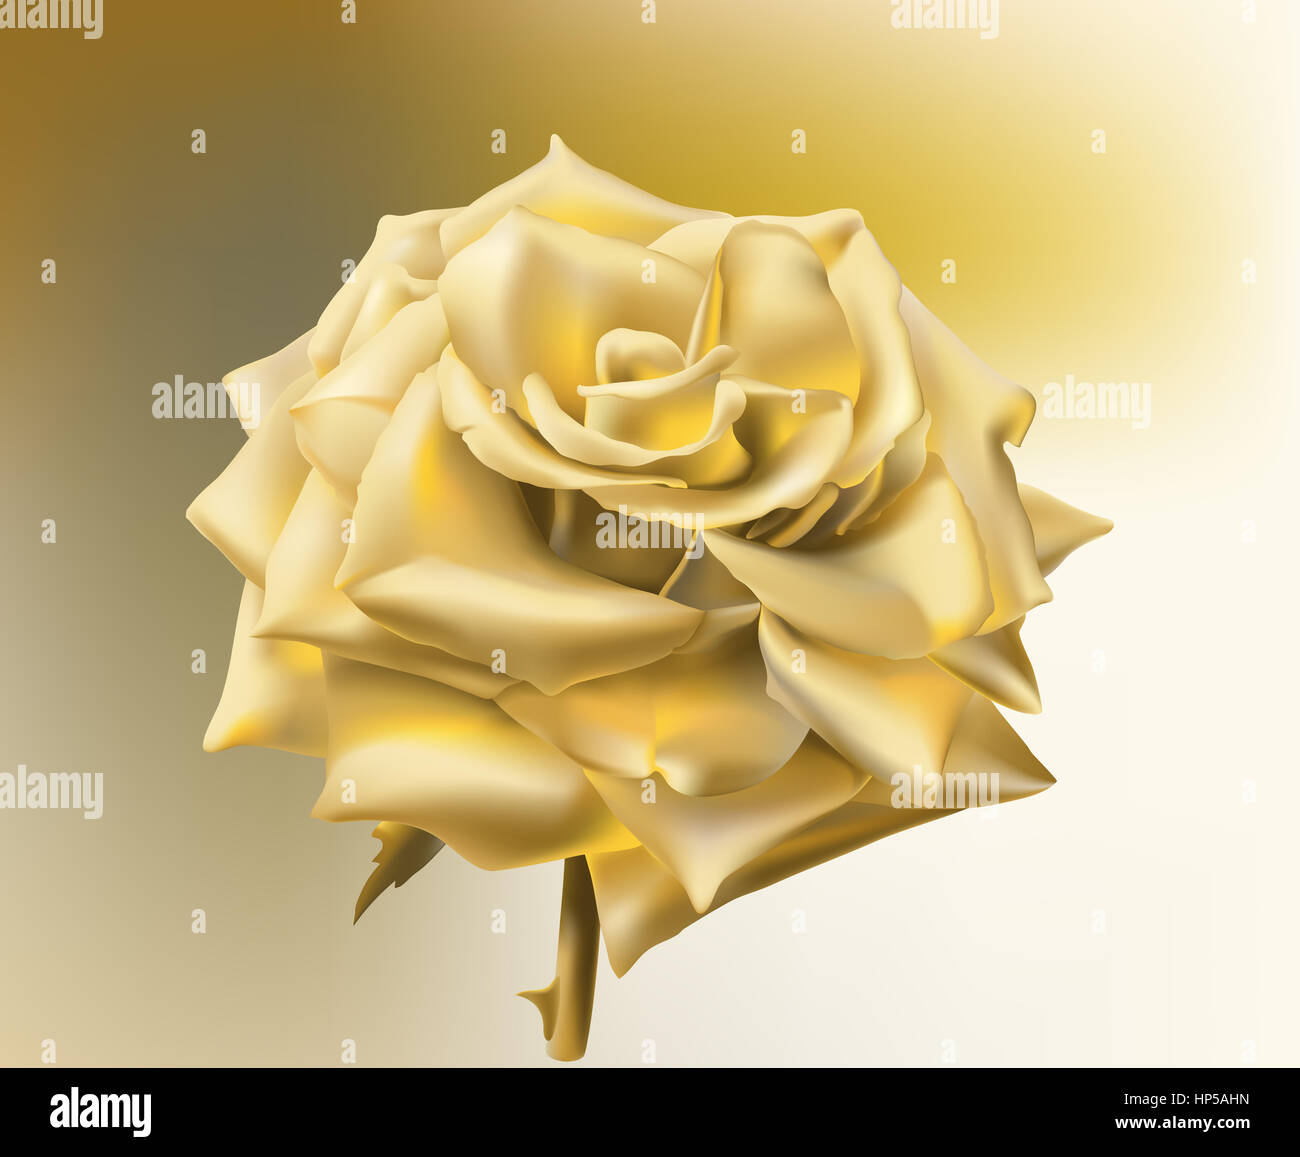 Gold Rose High Resolution Stock Photography and Images - Alamy